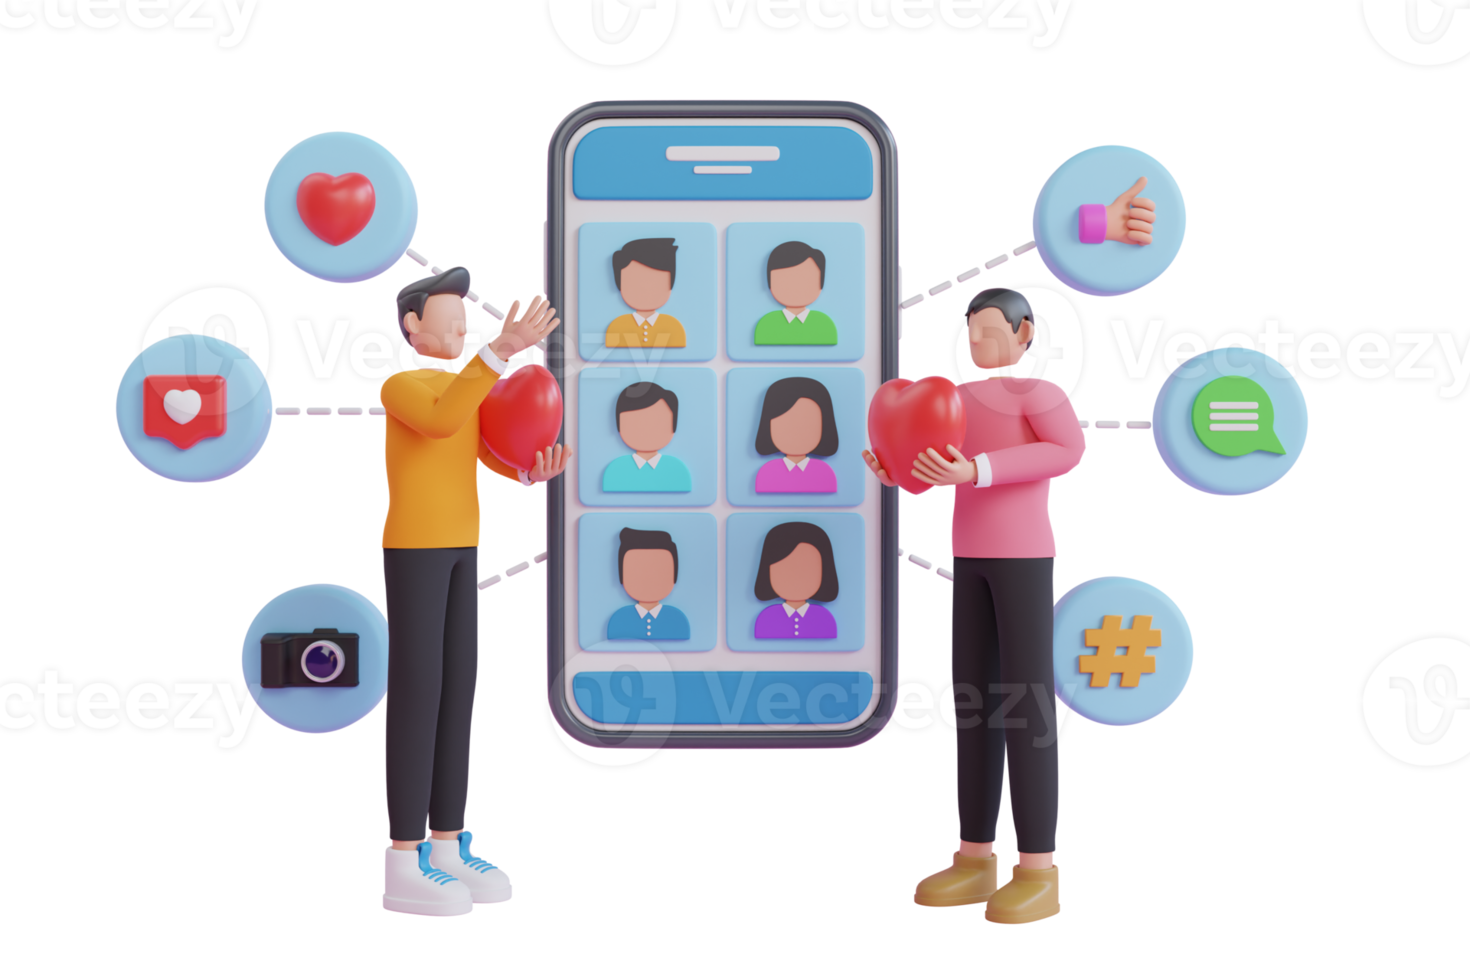 3d illustration of interaction between people through social networks. Social network user interface with new likes, comments, followers. 3d rendering png